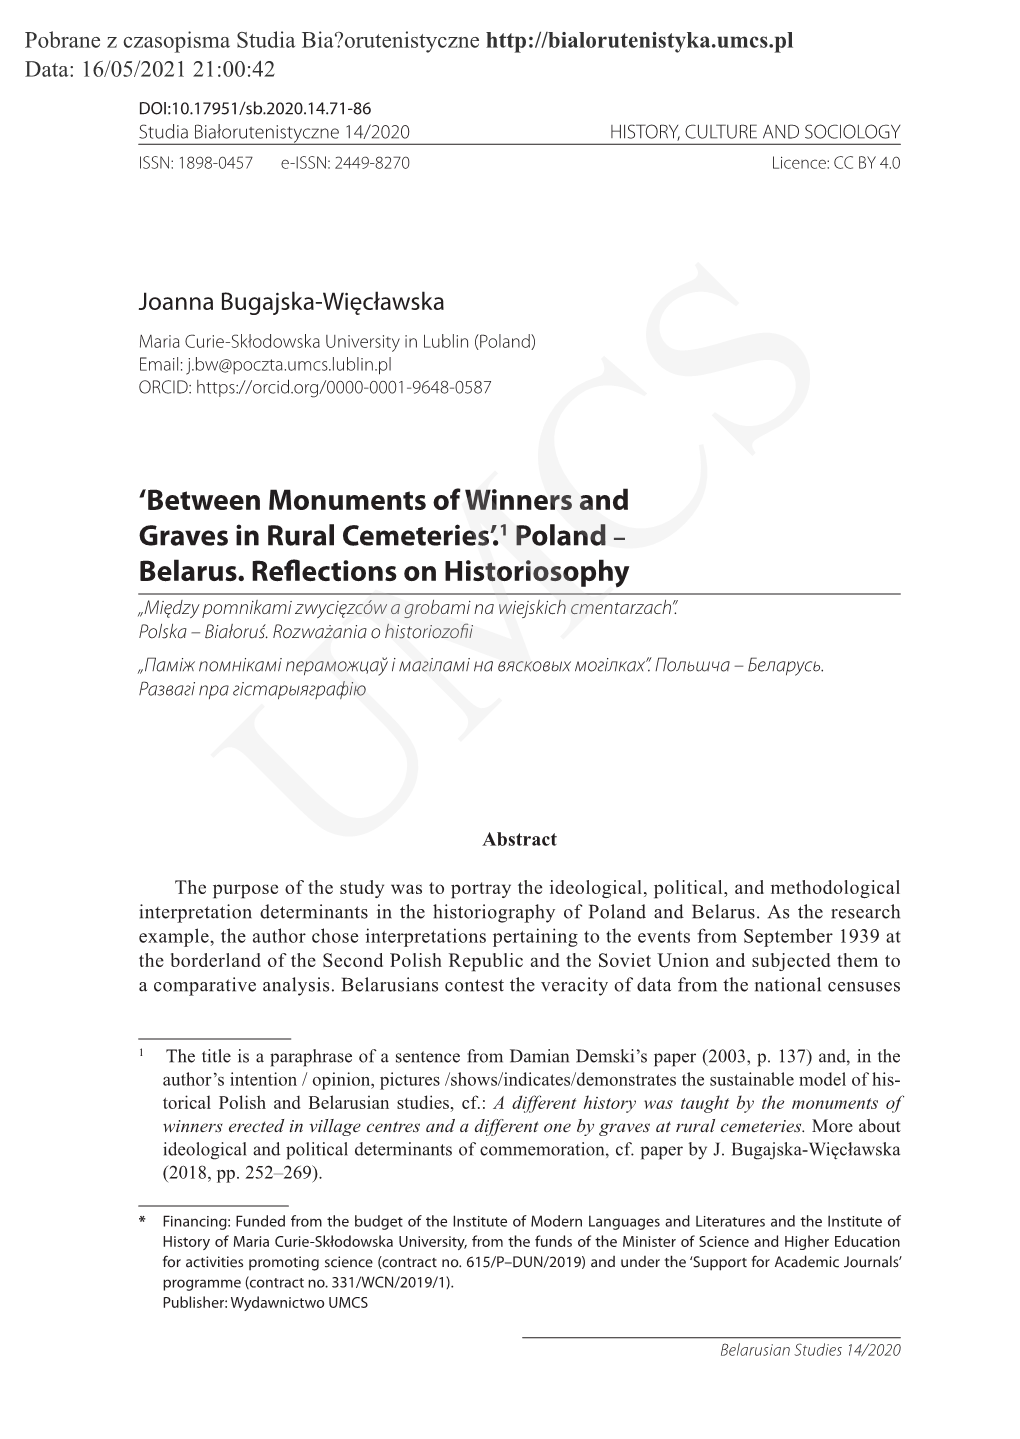 'Between Monuments of Winners and Graves in Rural Cemeteries'.1 Poland – Belarus. Reflections on Historiosophy